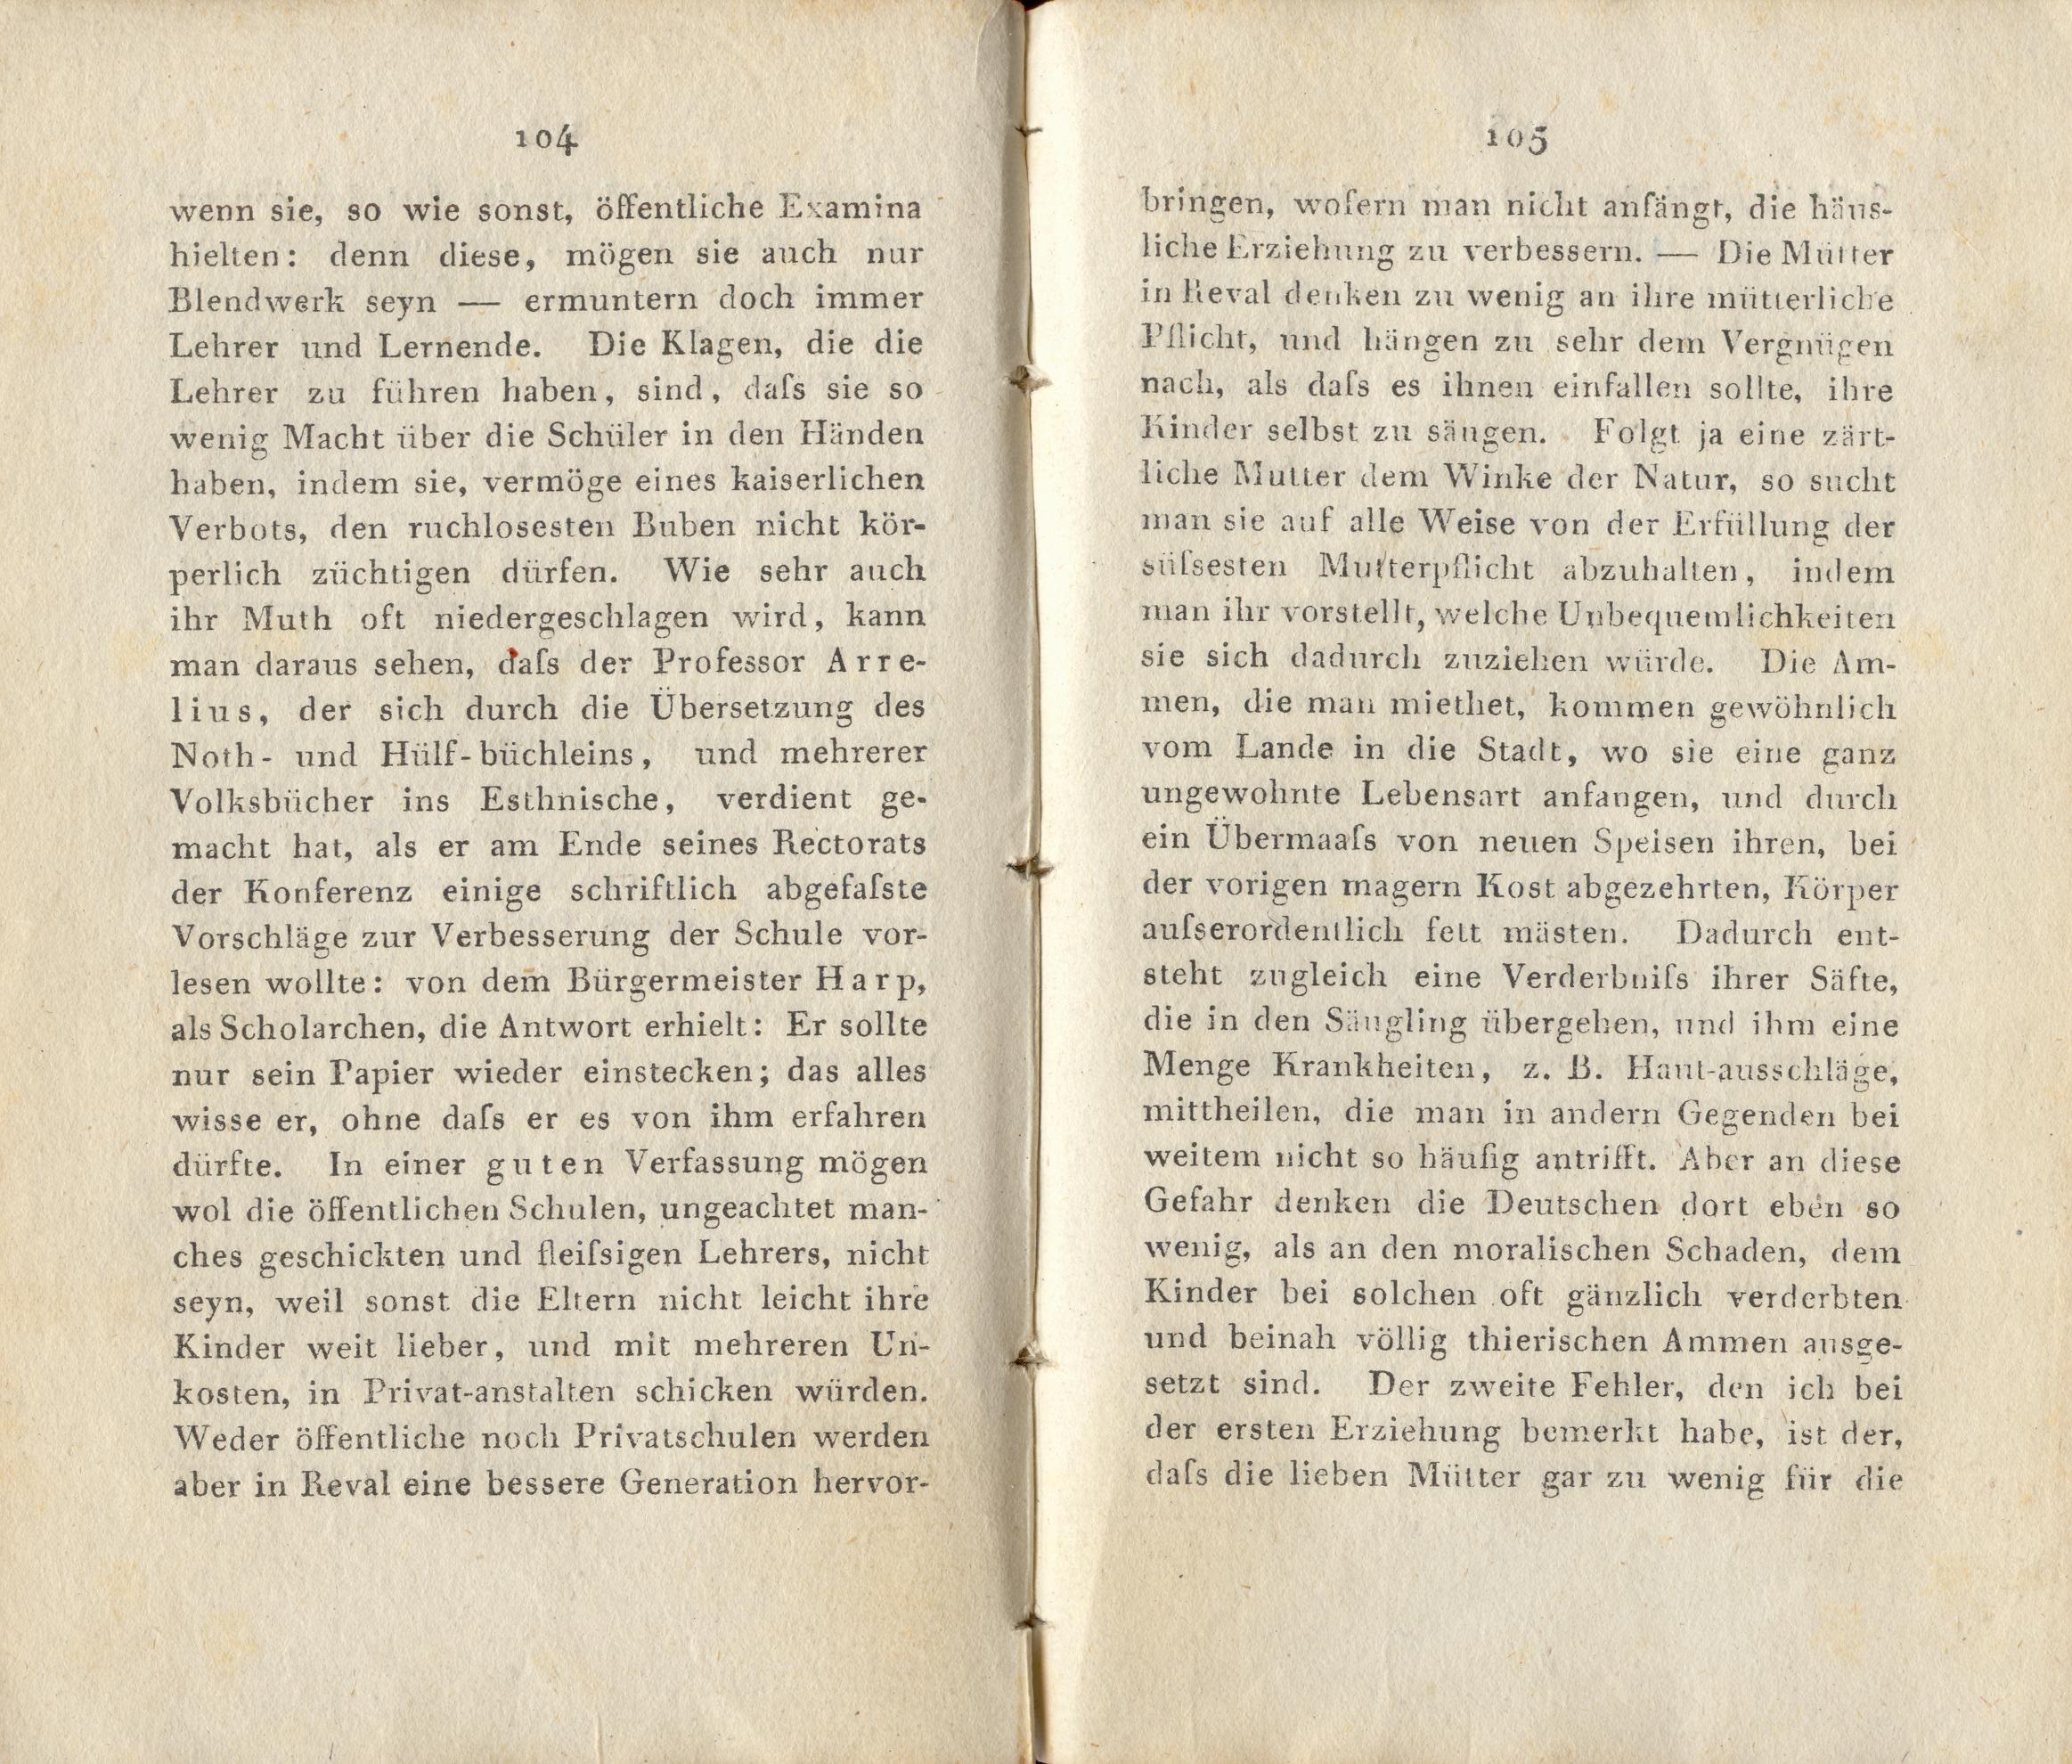 Briefe über Reval (1800) | 53. (104-105) Main body of text